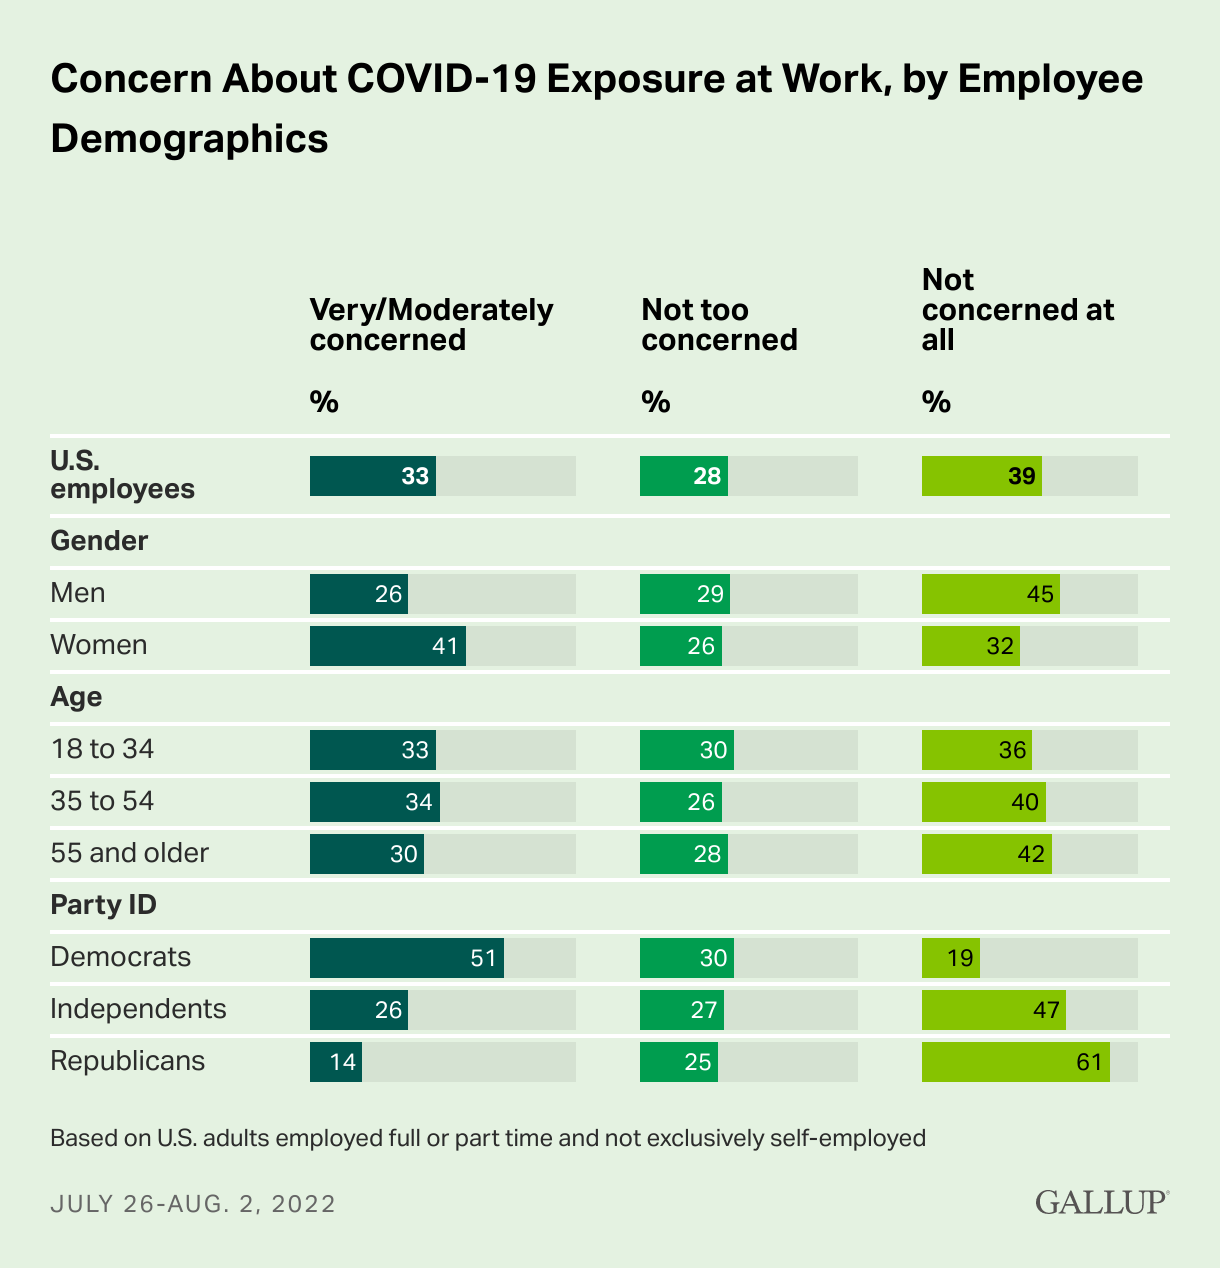 Concern by employee demographic